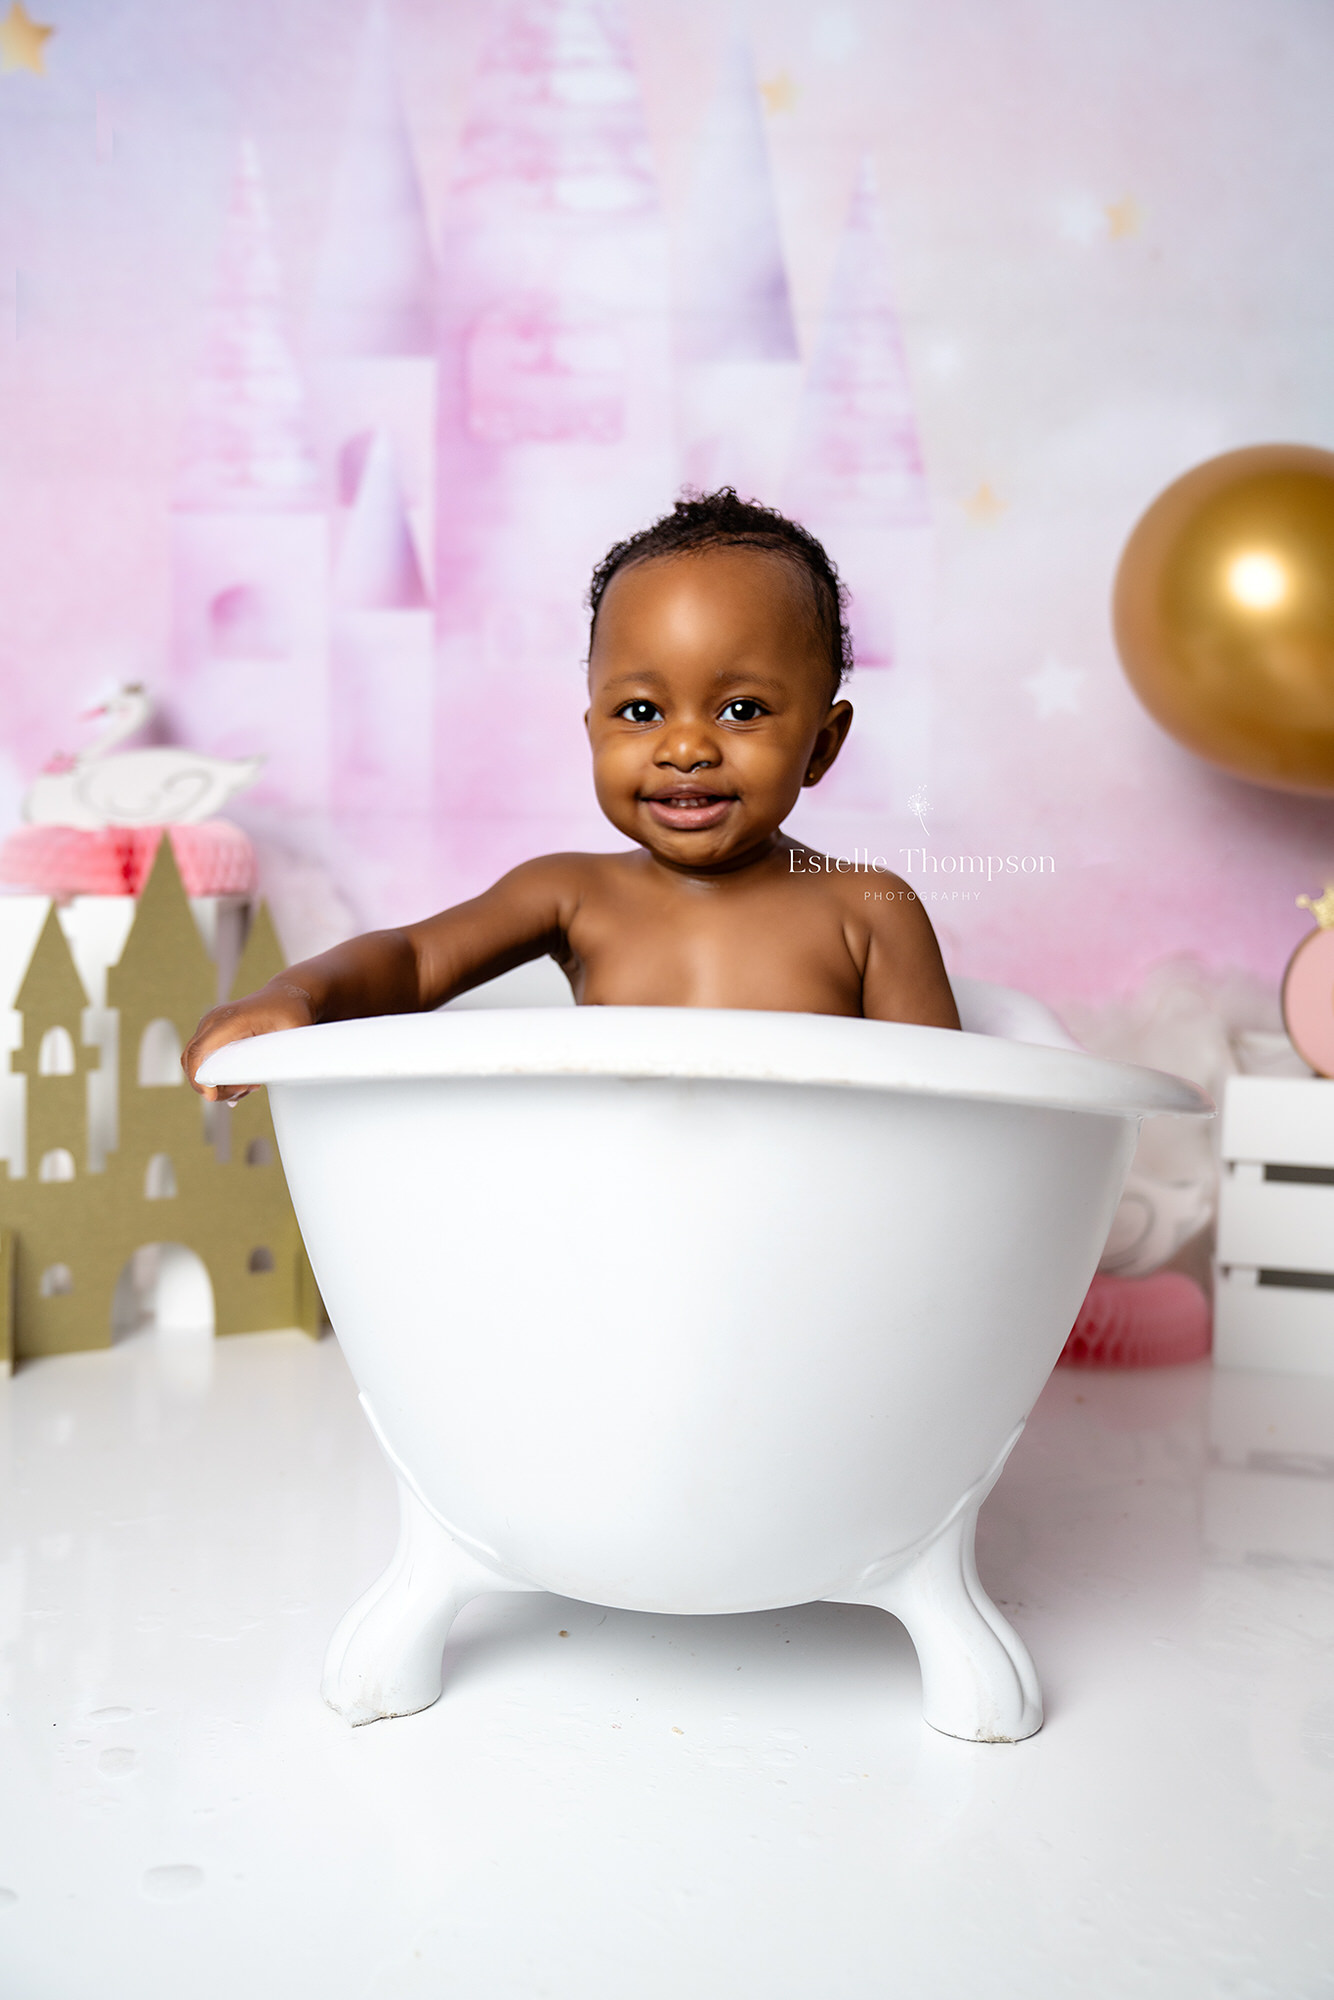 Baby girl in the bathtub after her cake smash photoshoot